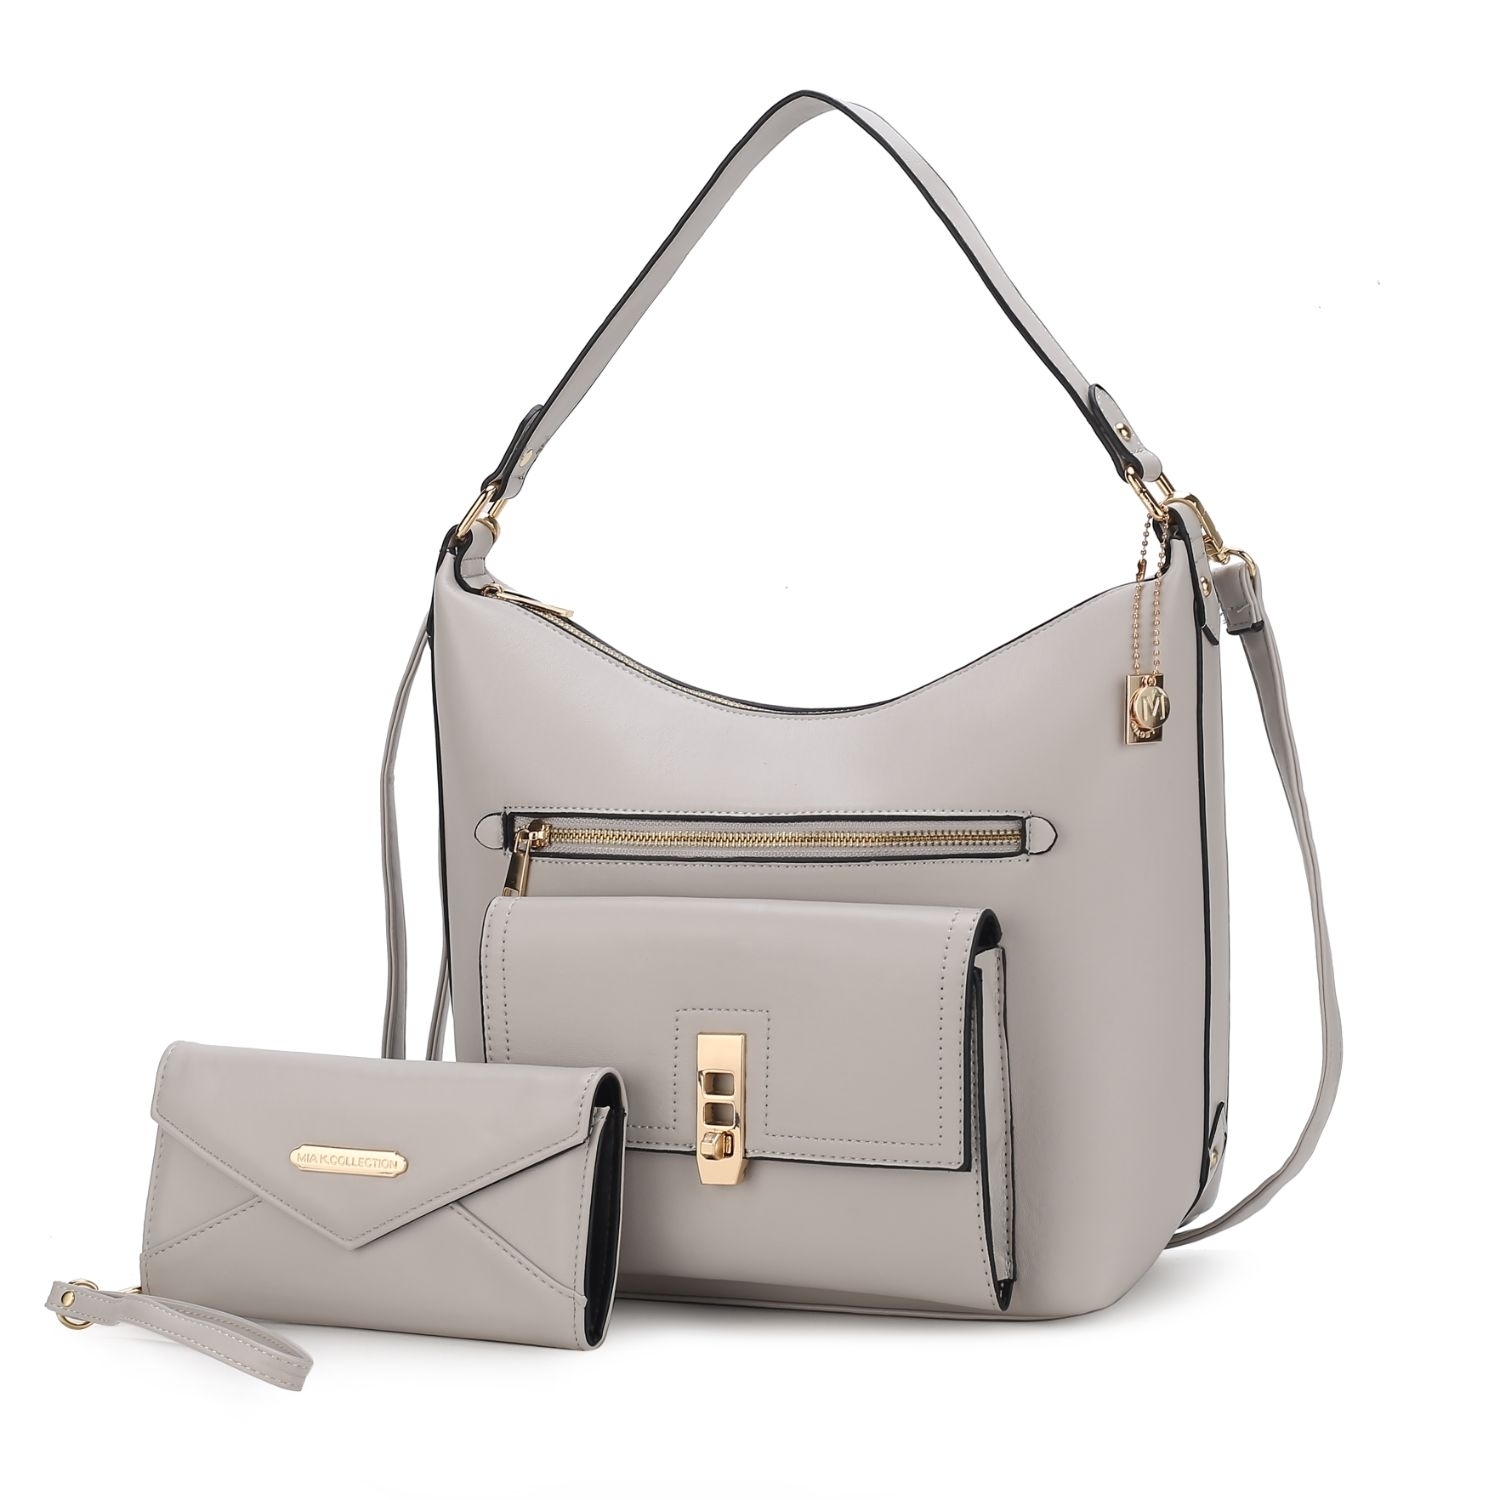 MKF Collection Clara Vegan Leather Women's Shoulder Bag With Wristlet Wallet - 2 Pieces By Mia K - Light Grey